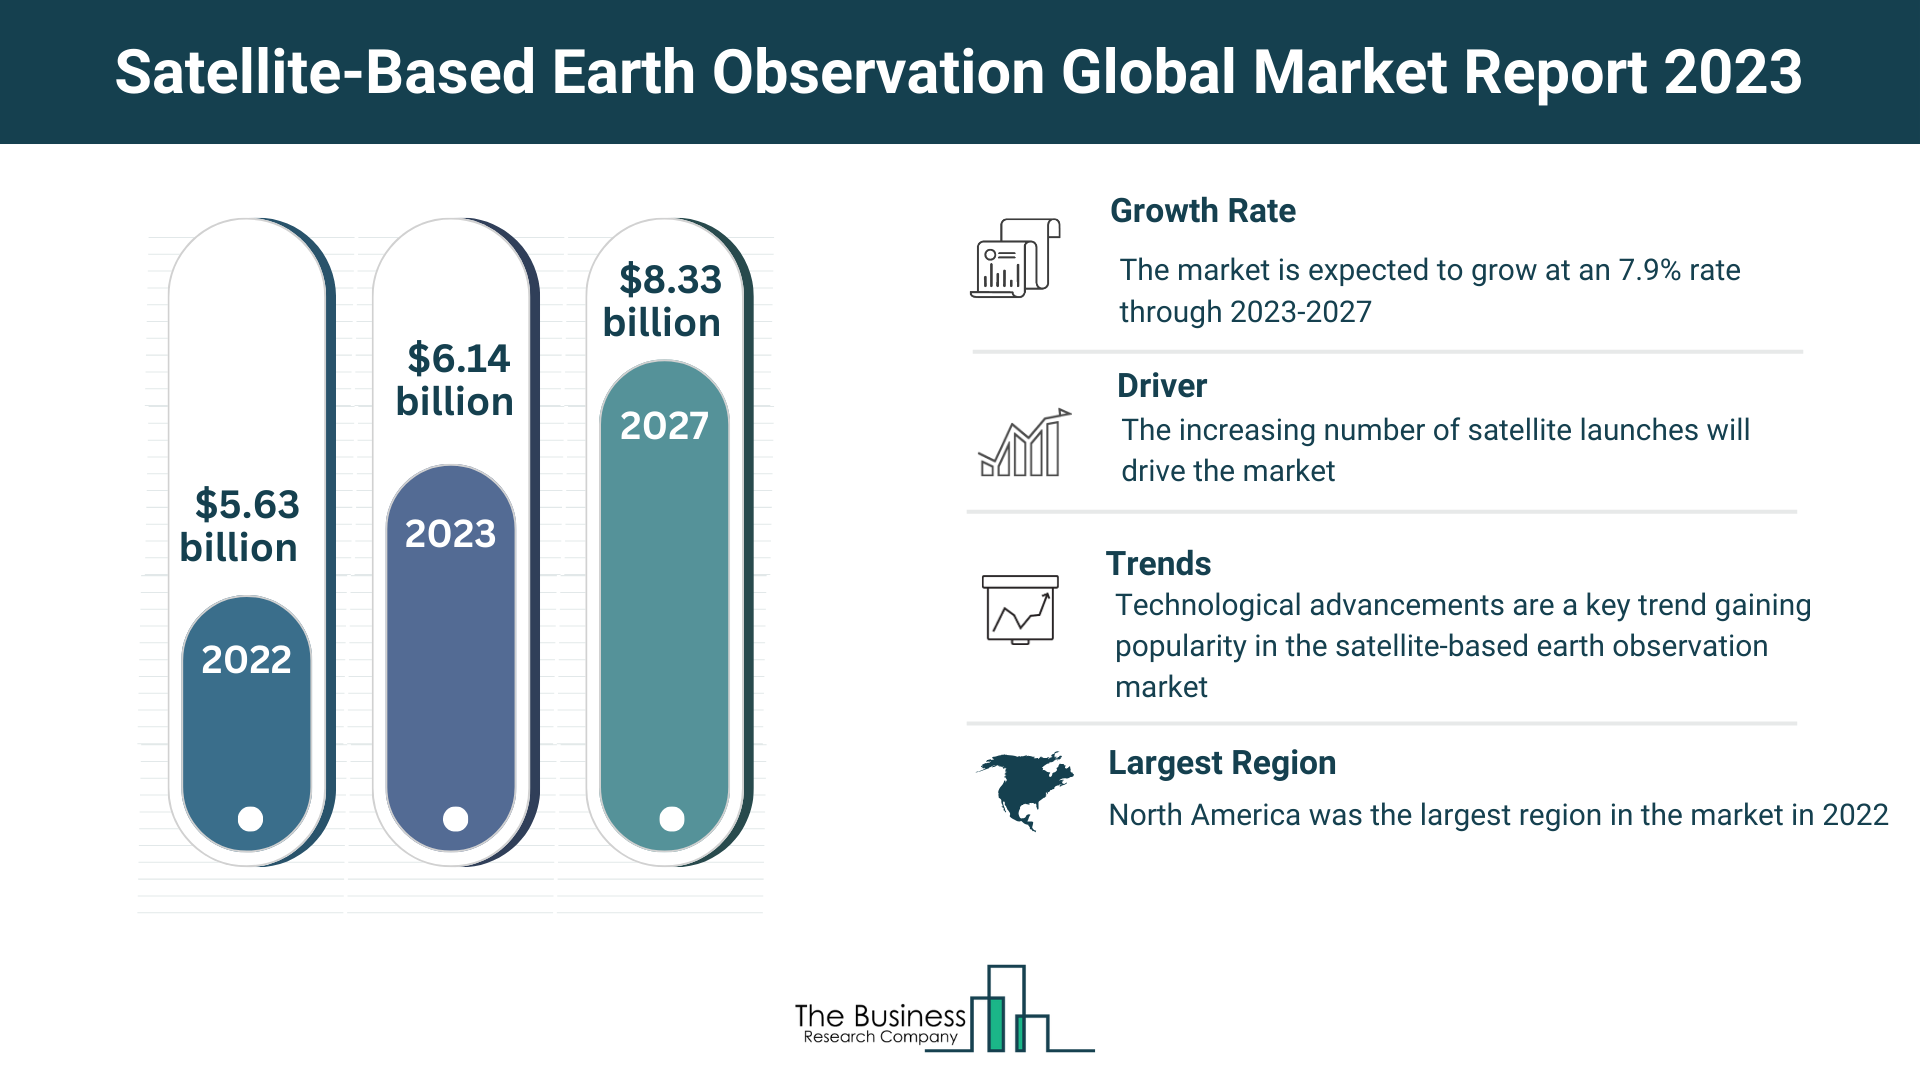 How Will Satellite-Based Earth Observation Market Grow Through 2023-2032?